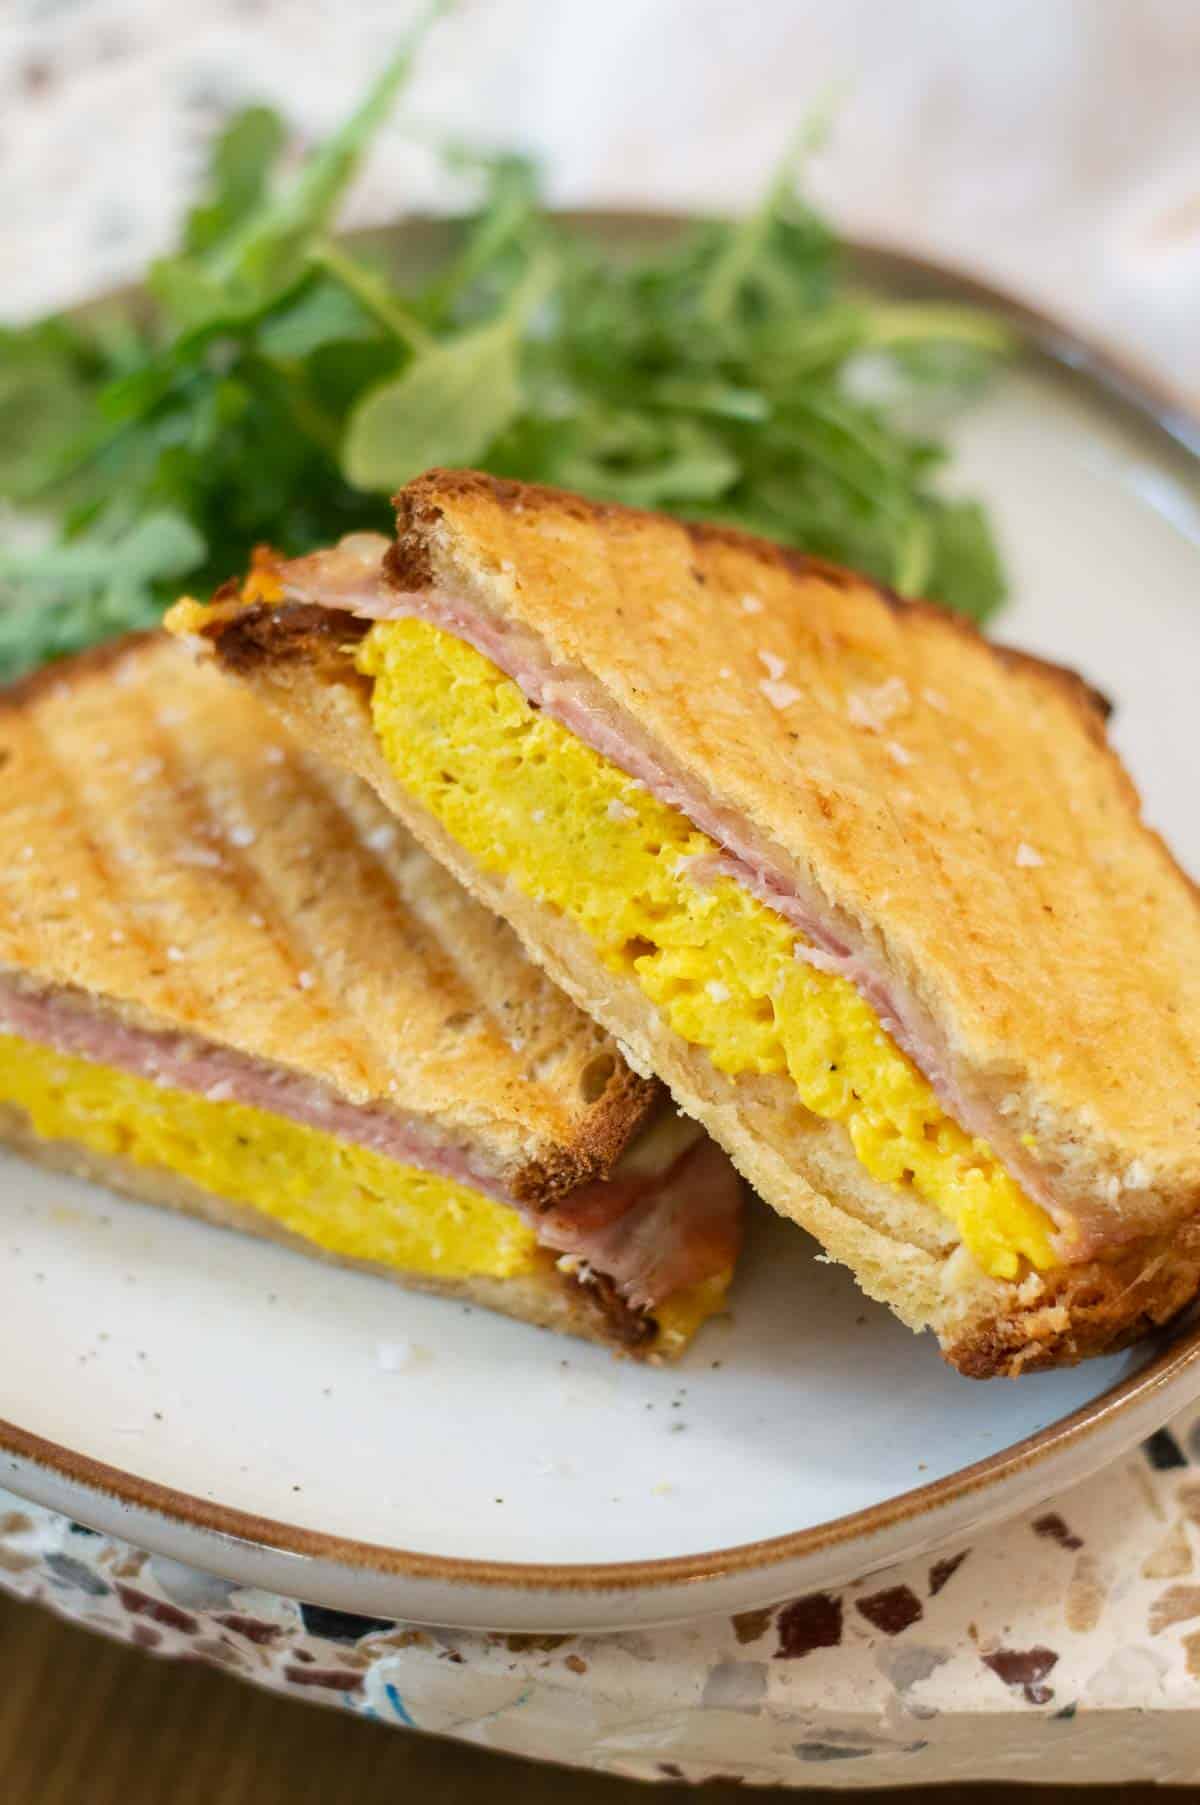 This copycat Denny's Moons Over My Hammy recipe is filled with two delicious cheeses, classic ham, scrambled eggs, and sourdough bread. It is a great breakfast sandwich with a memorable name that will make you smile.